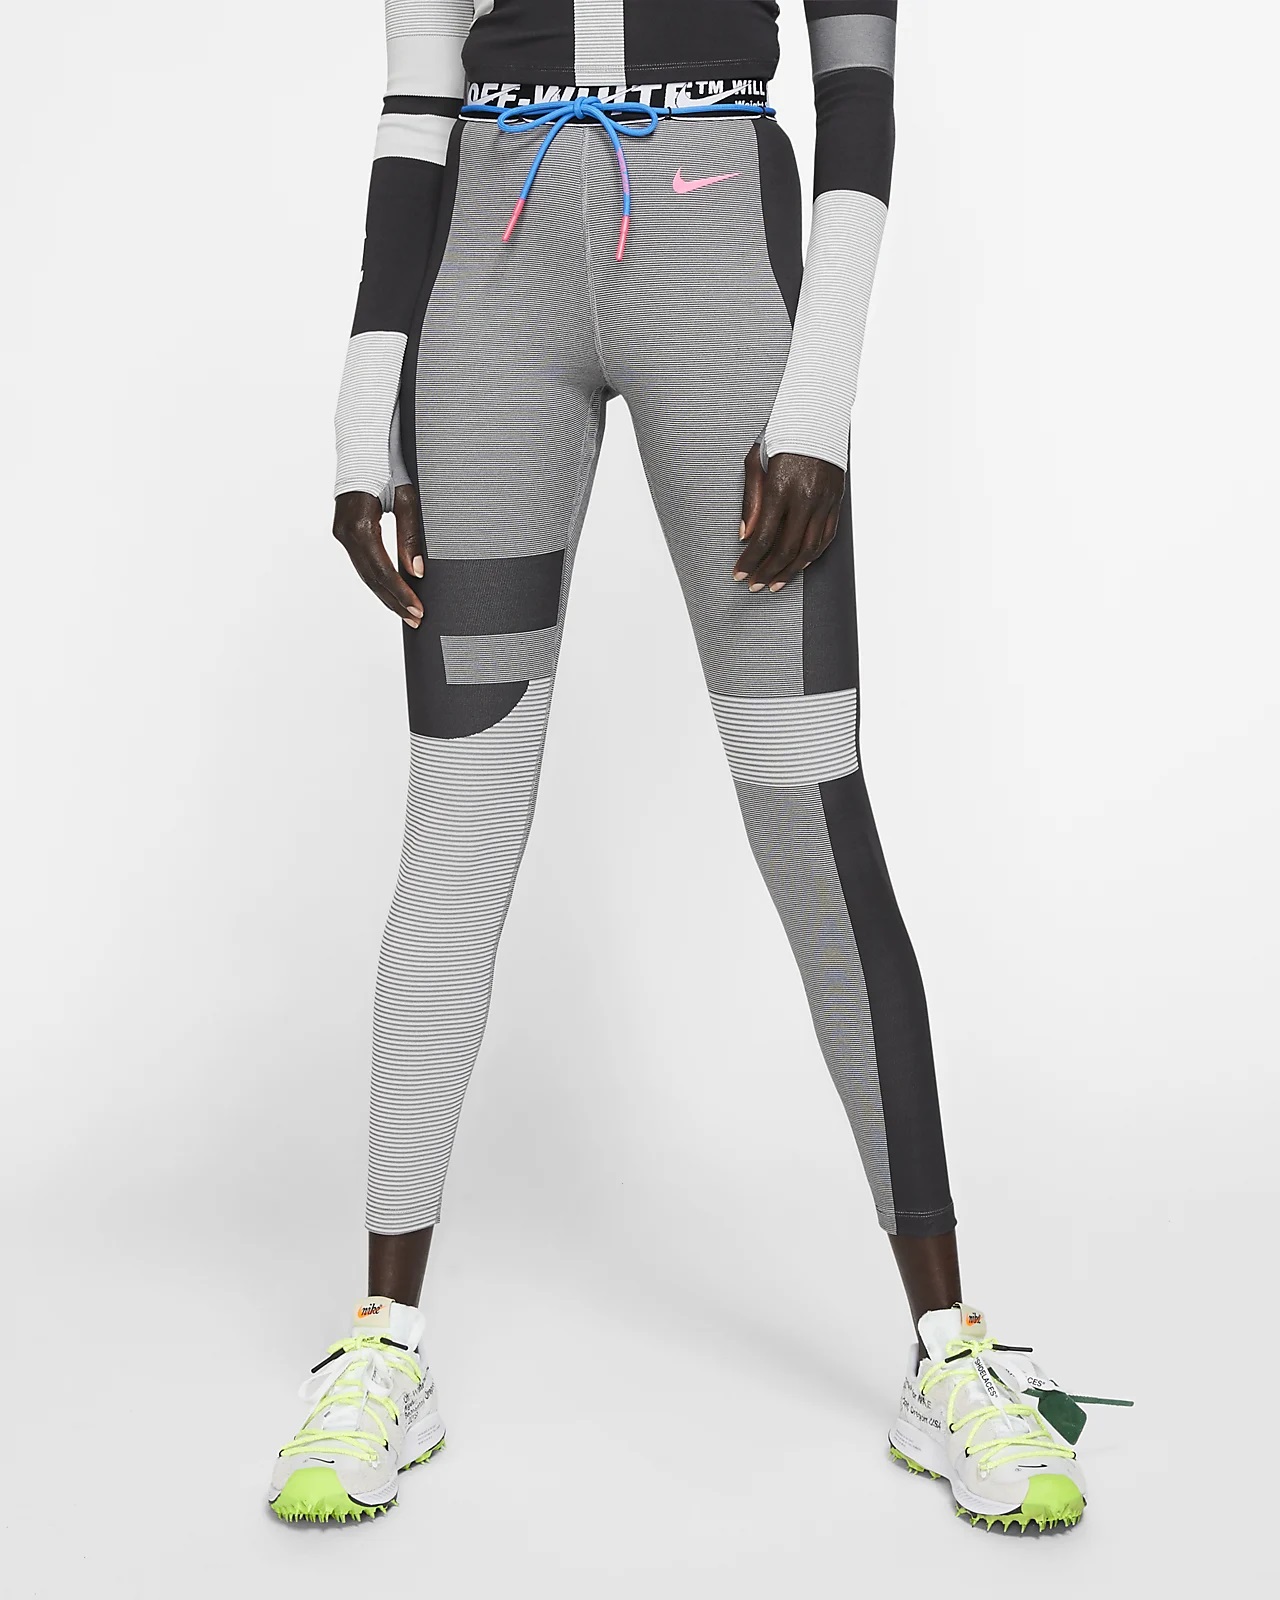 Nike And Off-White Release ‘Athlete In Progress’ Tights And Top